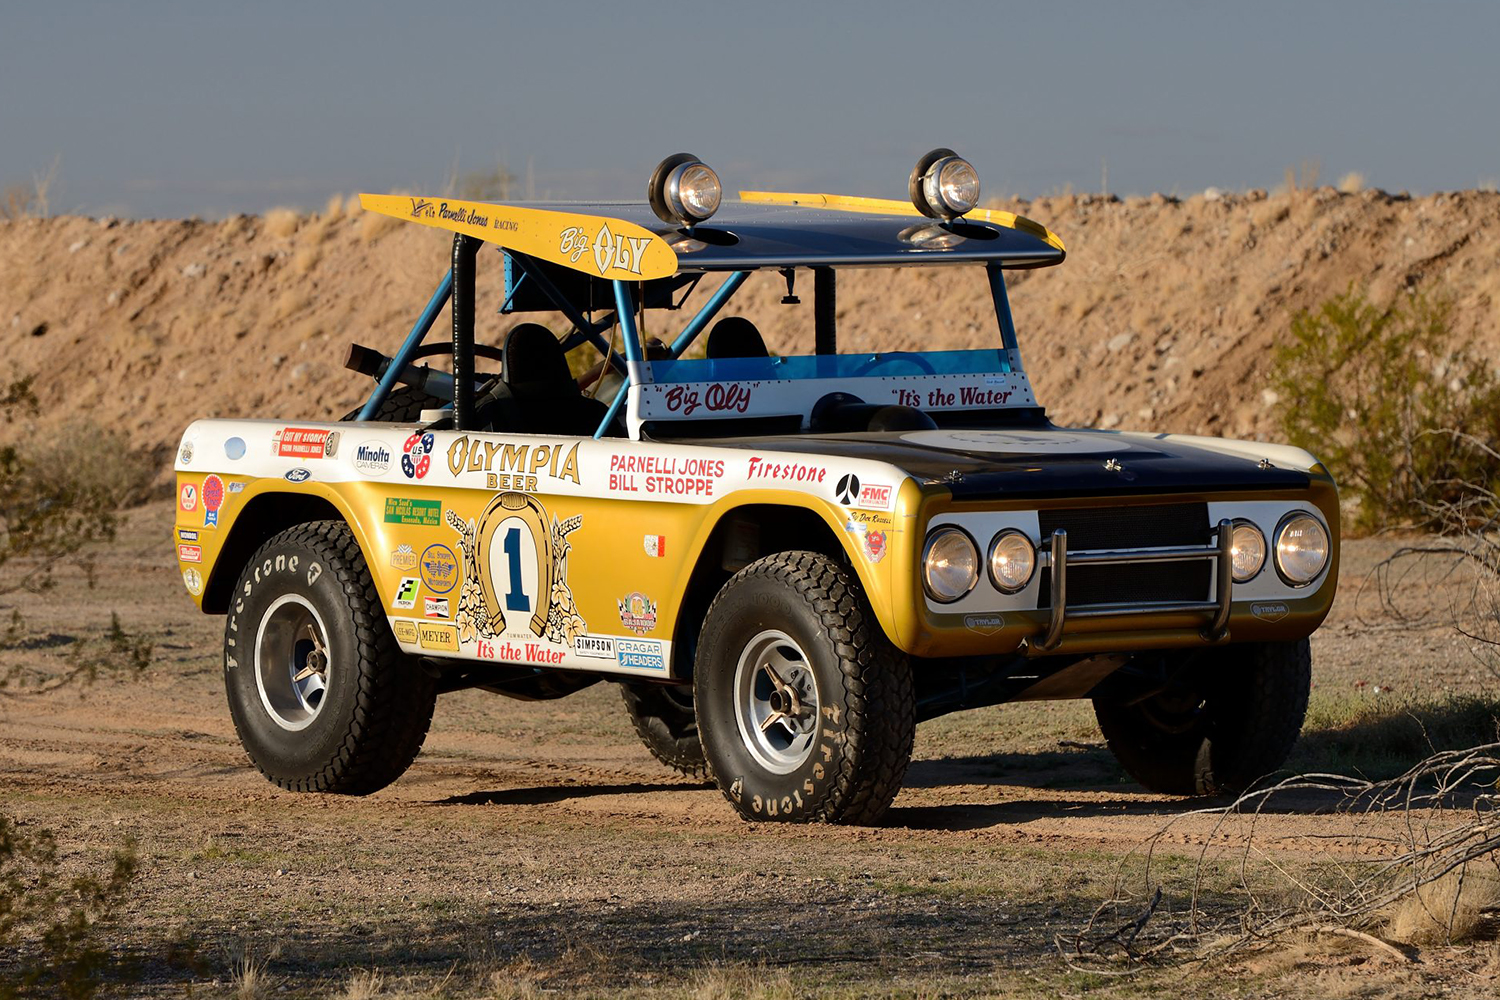 The 1969 Ford Bronco "Big Oly" from Parnelli Jones